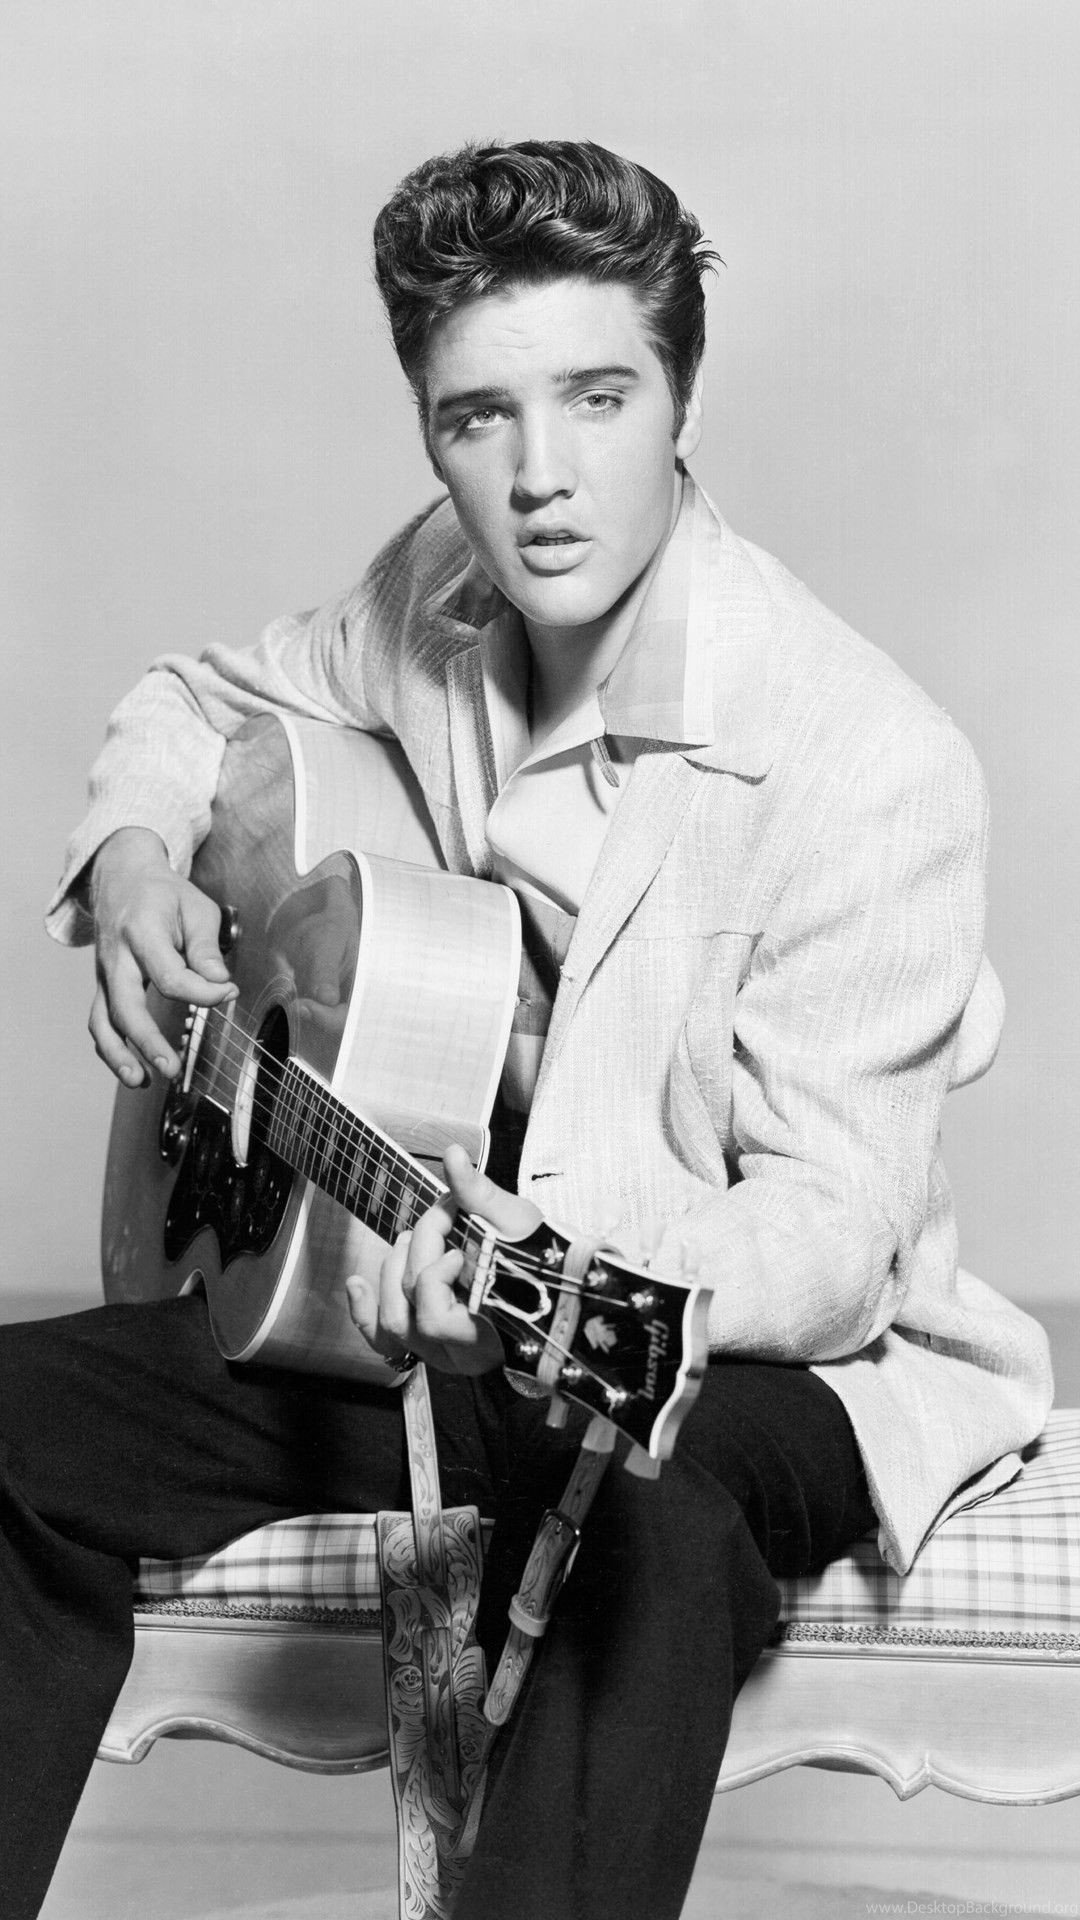 Elvis Presley: One of the most influential artists of the 20th century, “Suspicious Minds”. 1080x1920 Full HD Wallpaper.